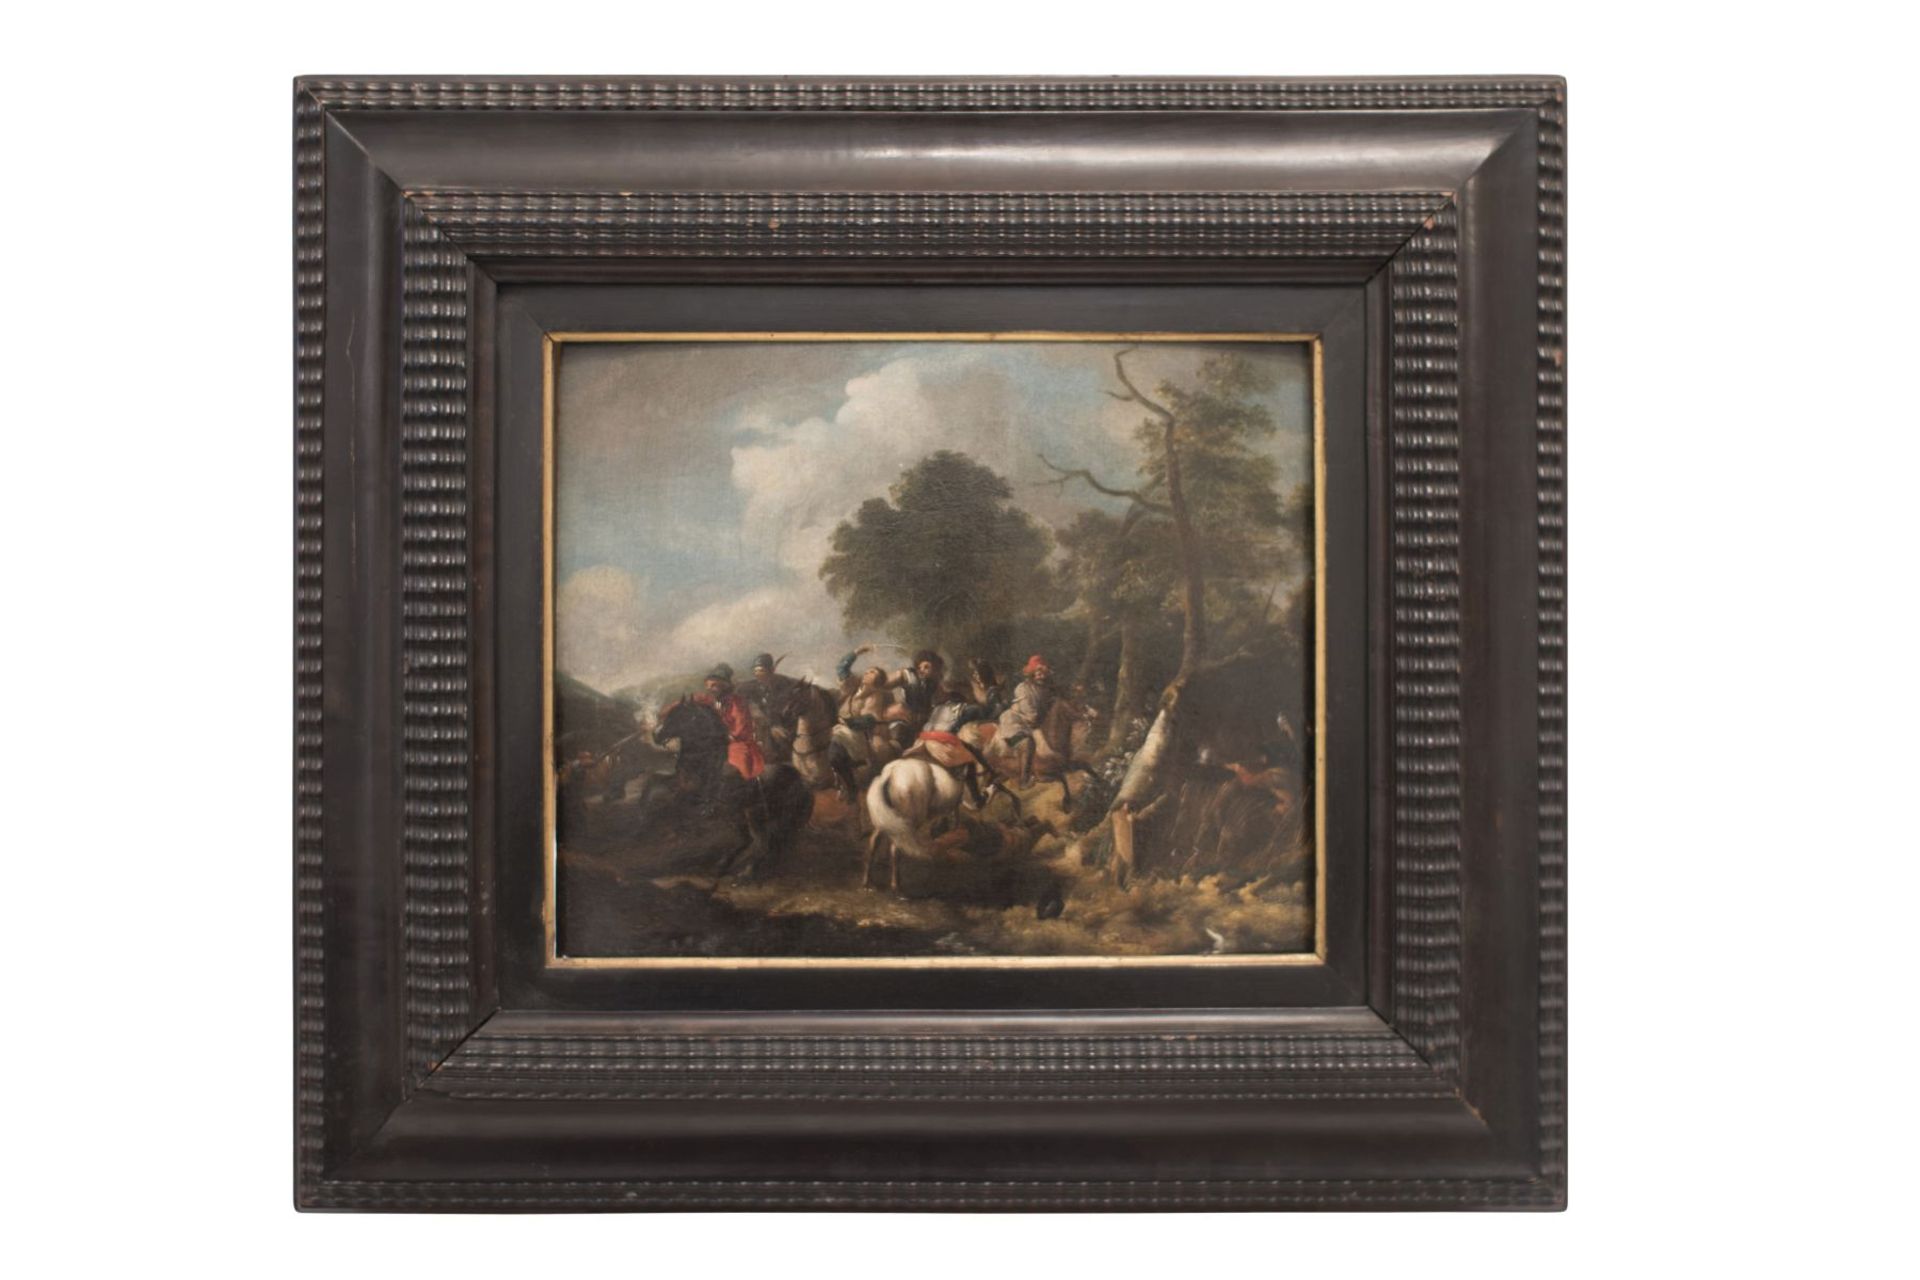 Painter of the 19th Century "Battle Scene with Horses"